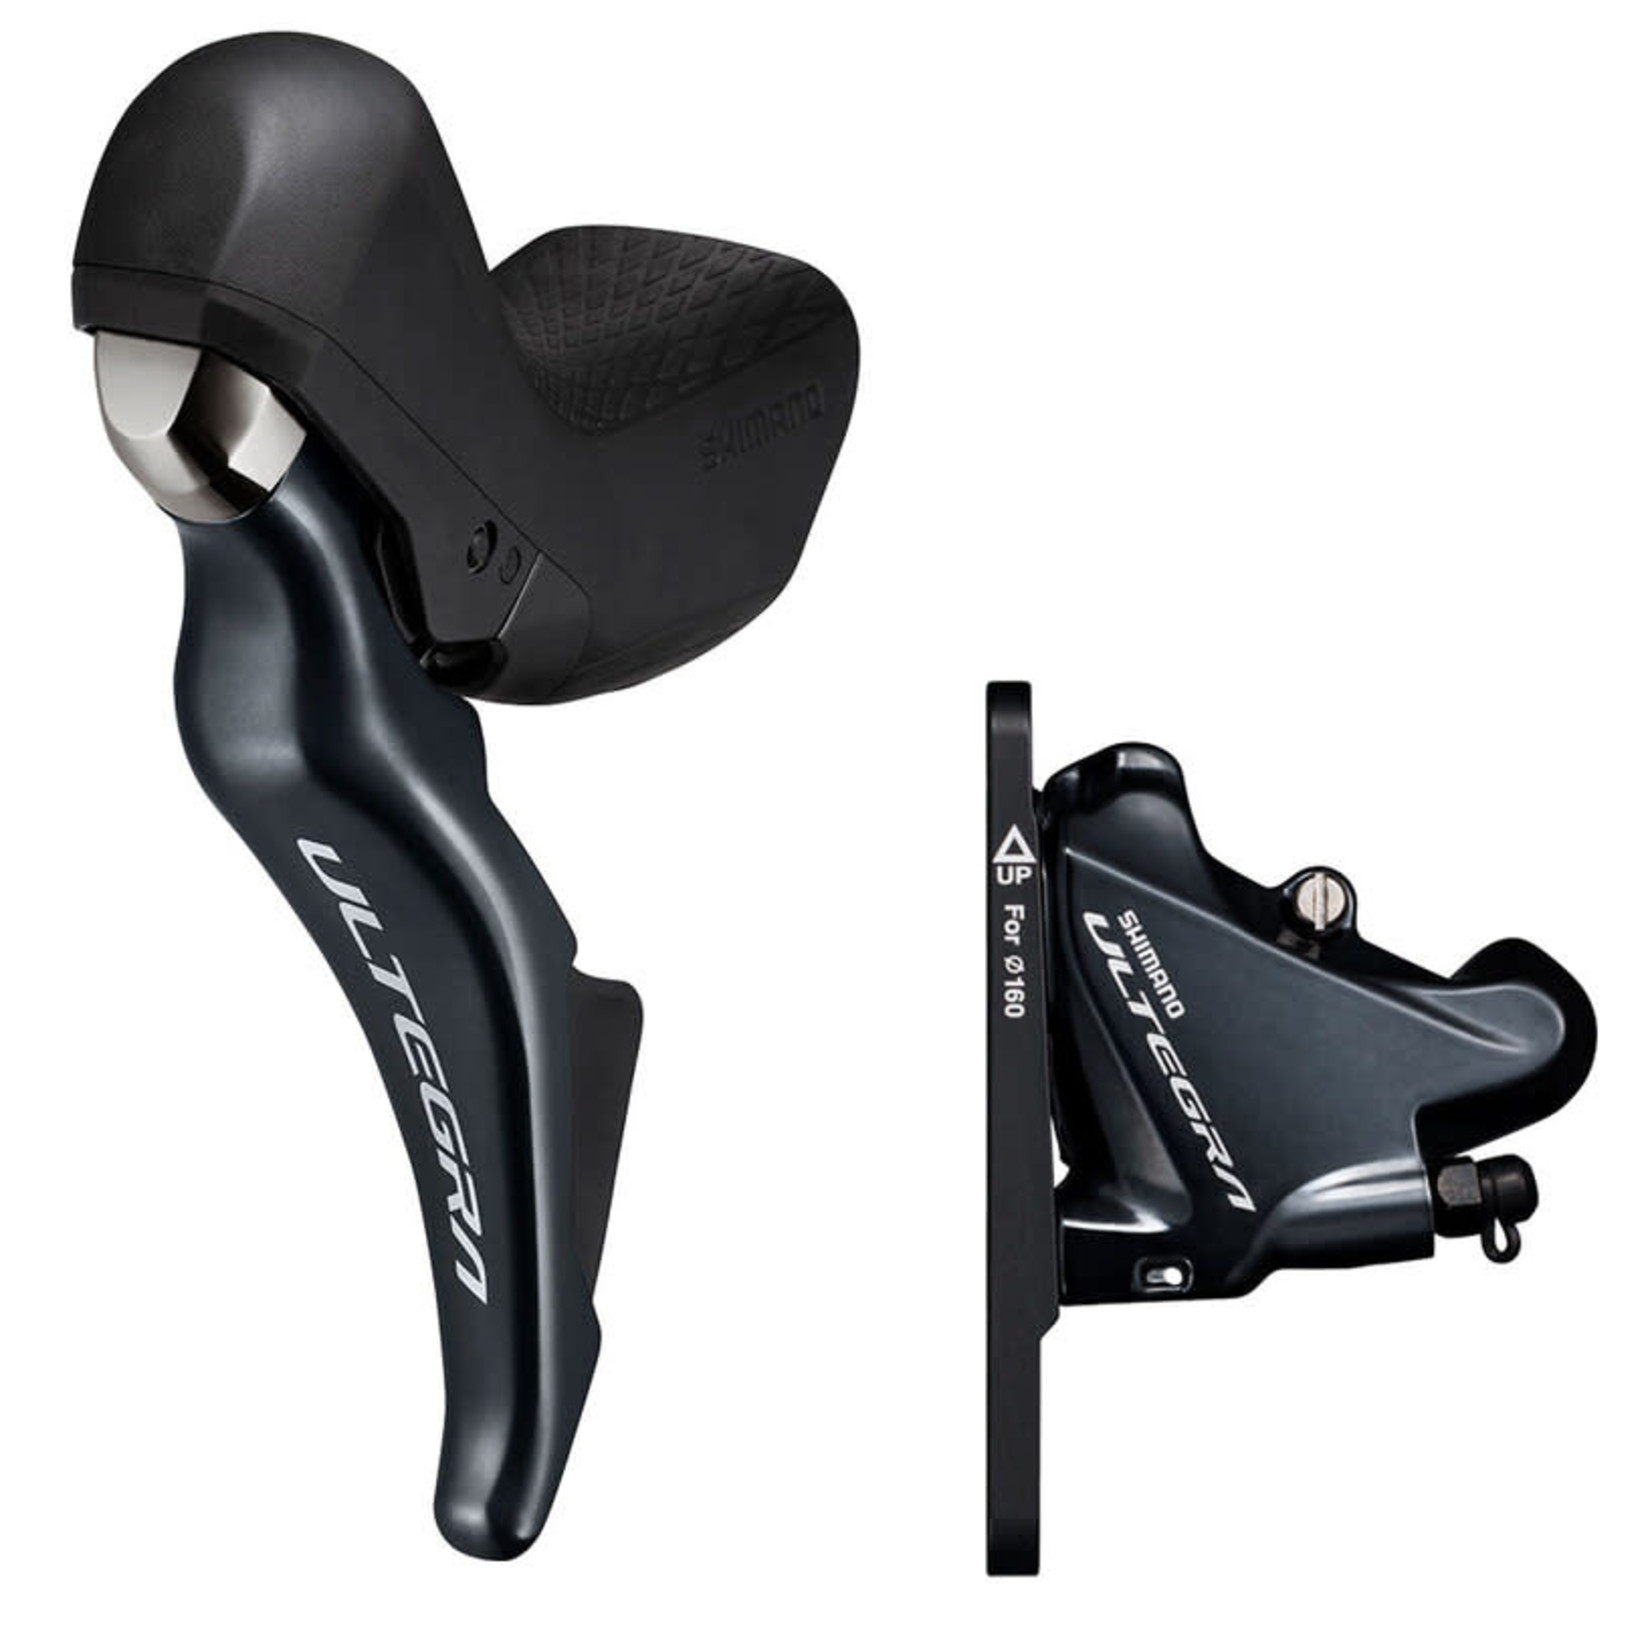 SHIMANO ULTEGRA  ST-8020 SHIFTER/HYDRAULIC LEVER WITH ASSEMBLED 8070 DISC BRAKE 11s